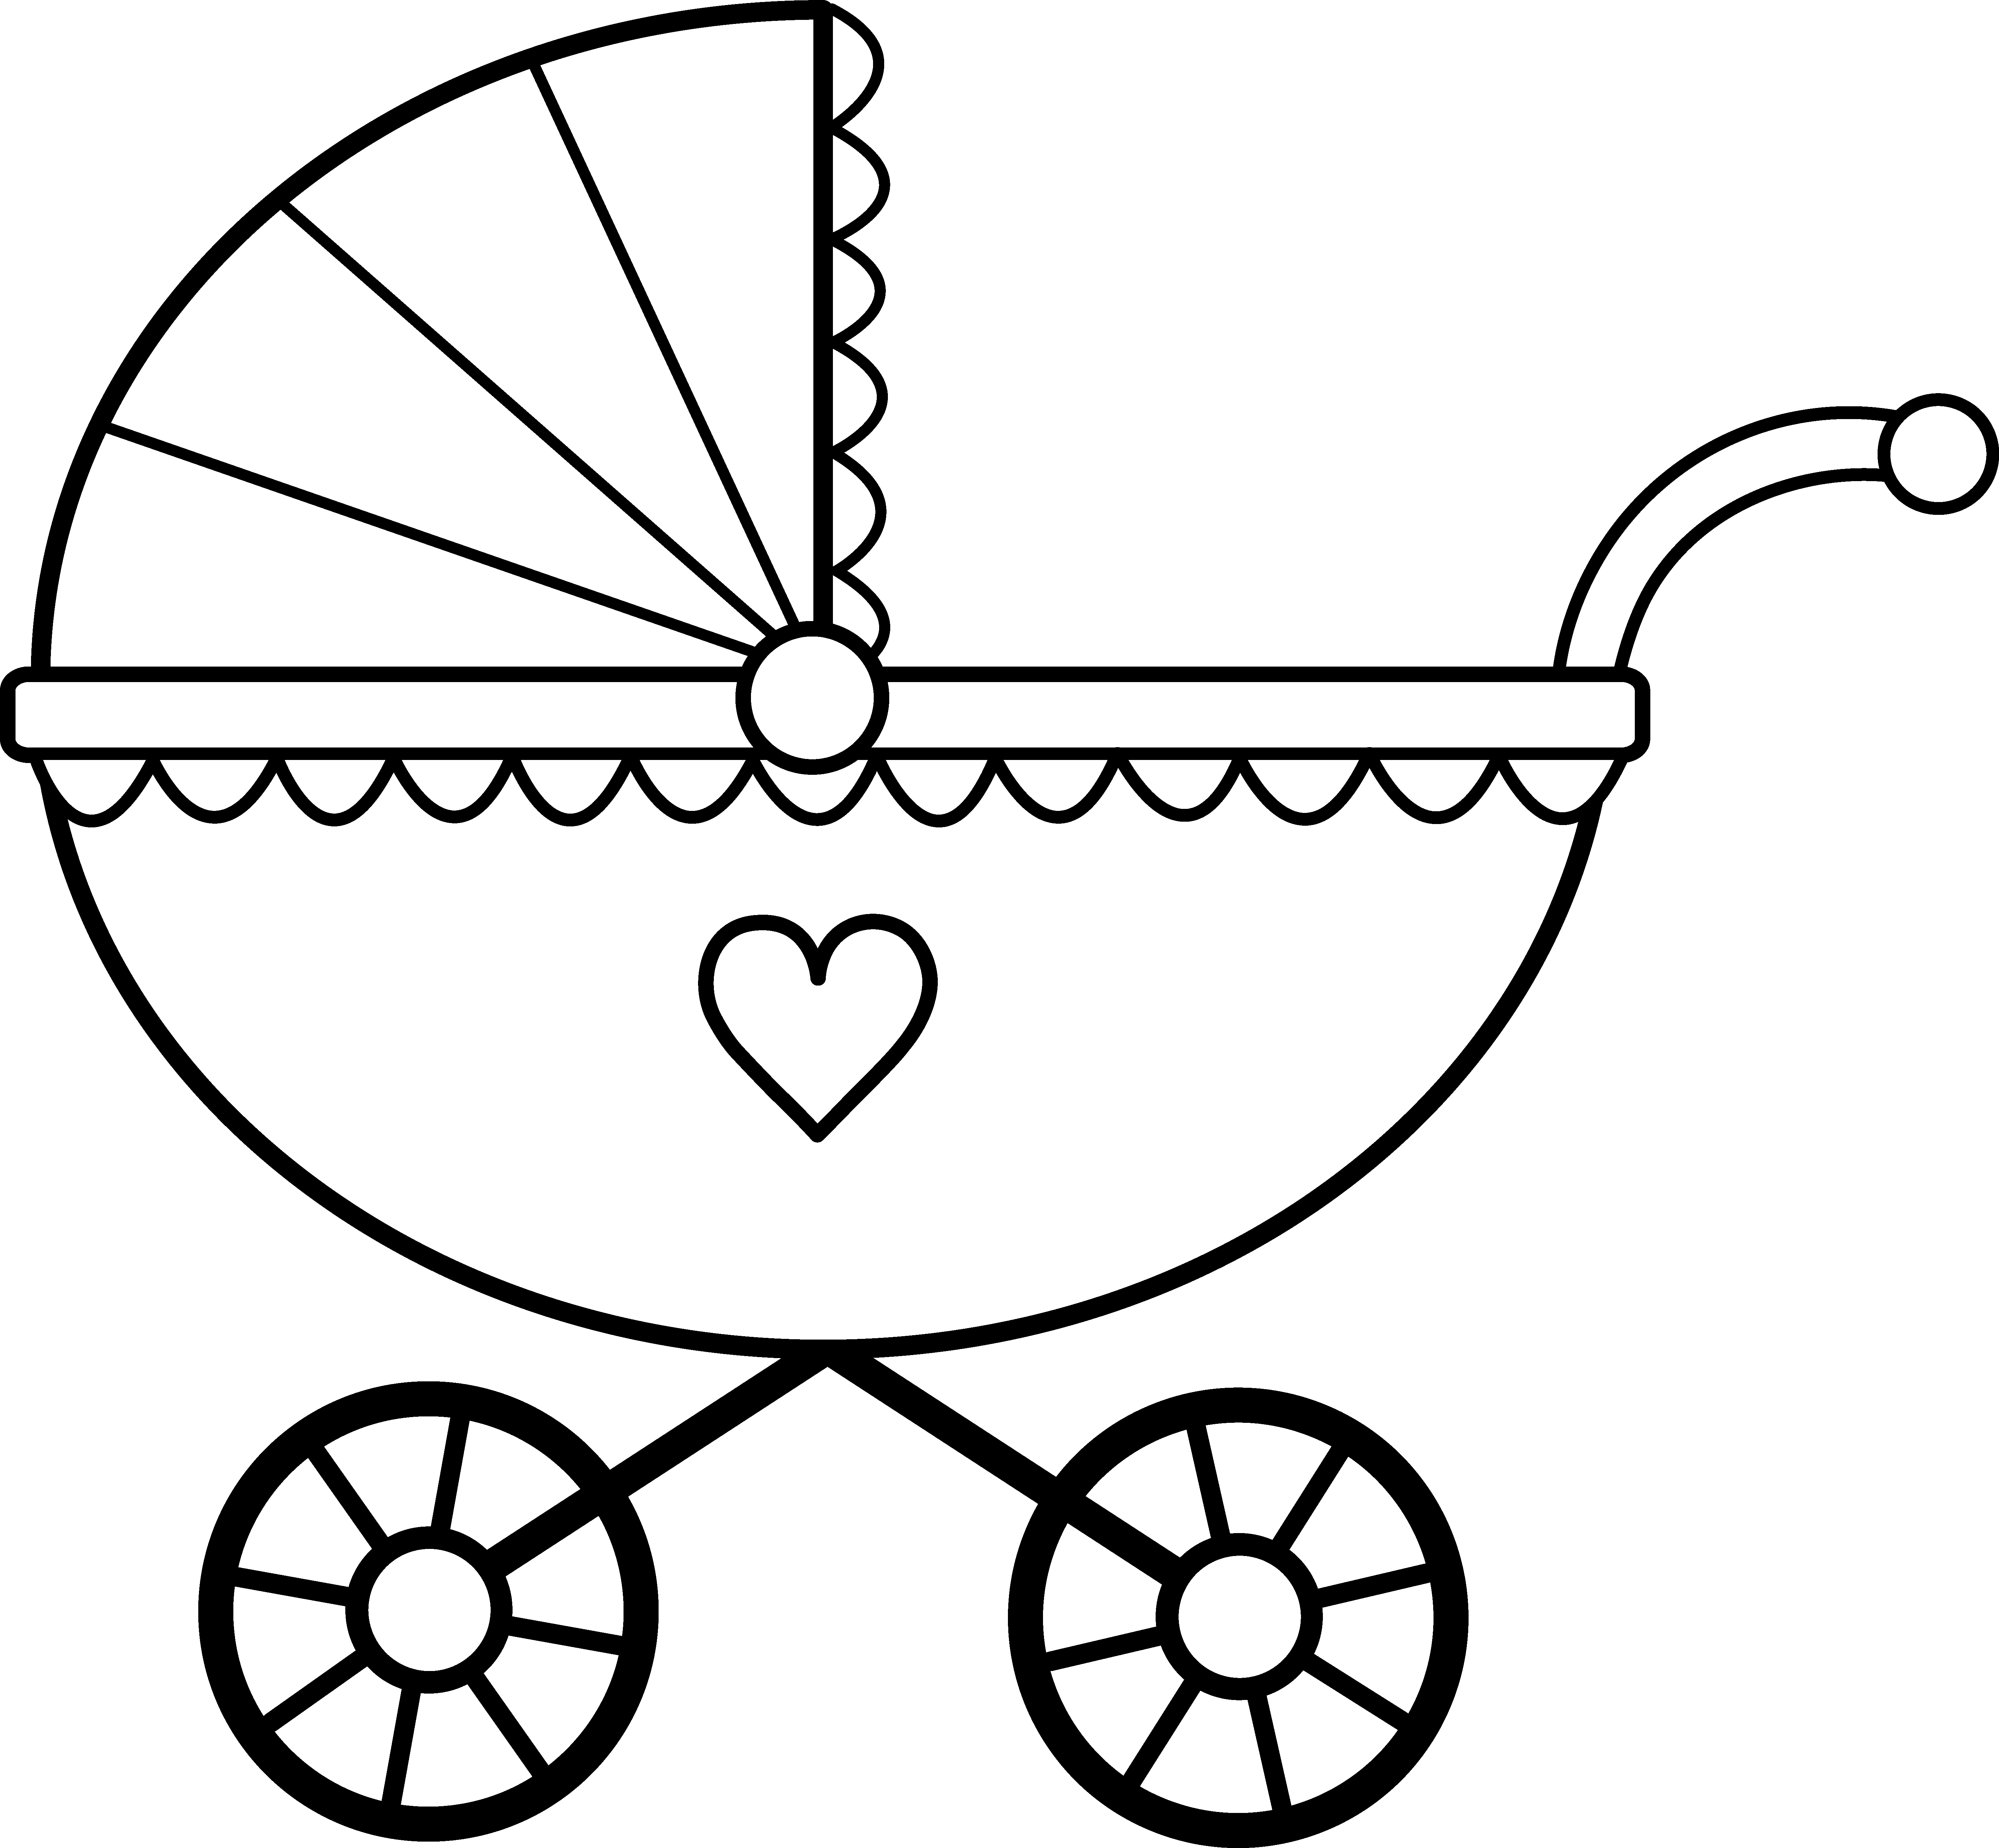 Baby line drawing at. Infant clipart sketch